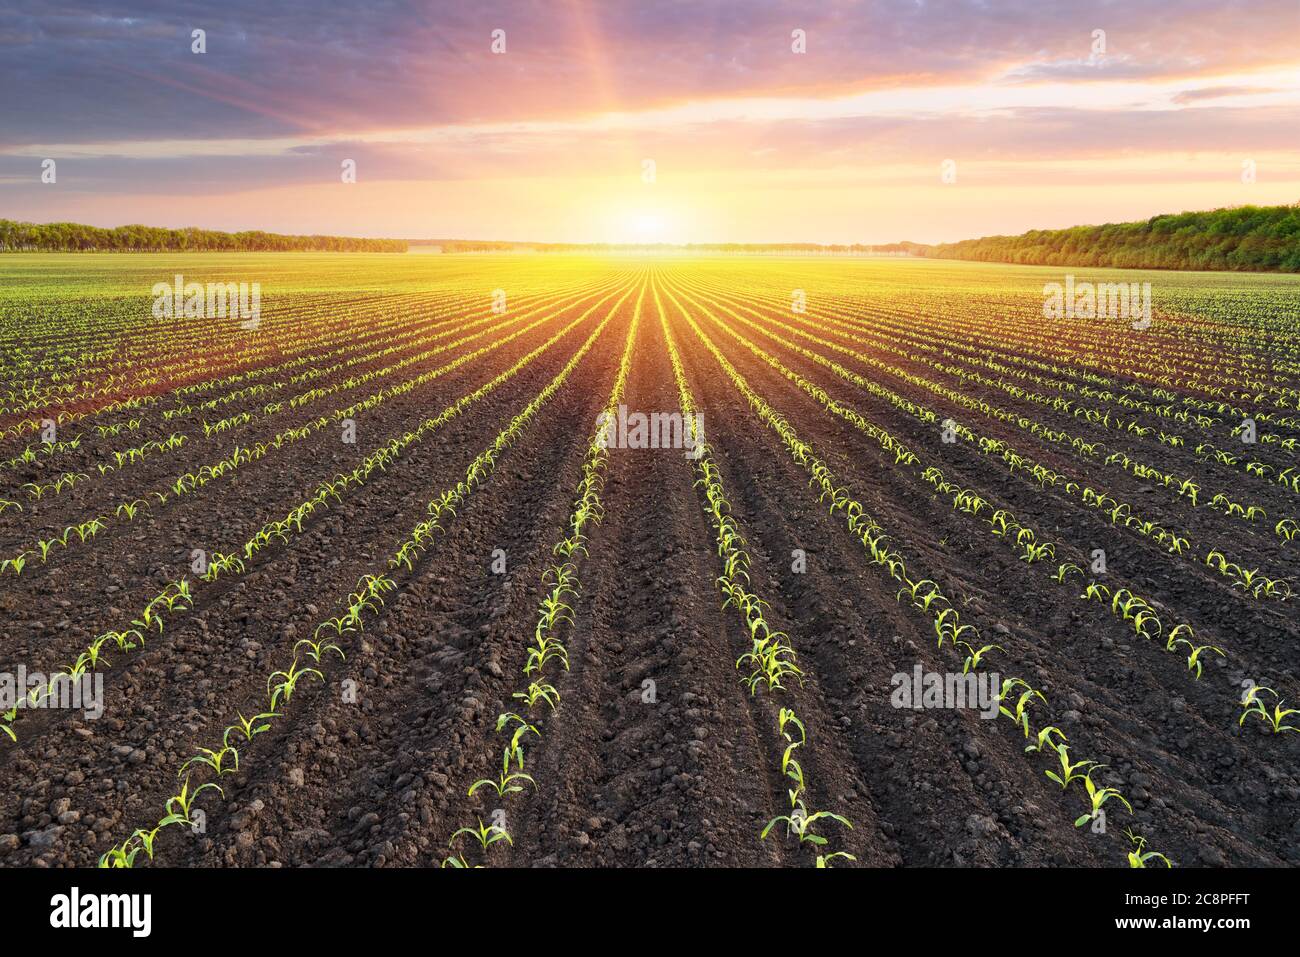 Field with rows of young corn. Morning rural landscape Stock Photo